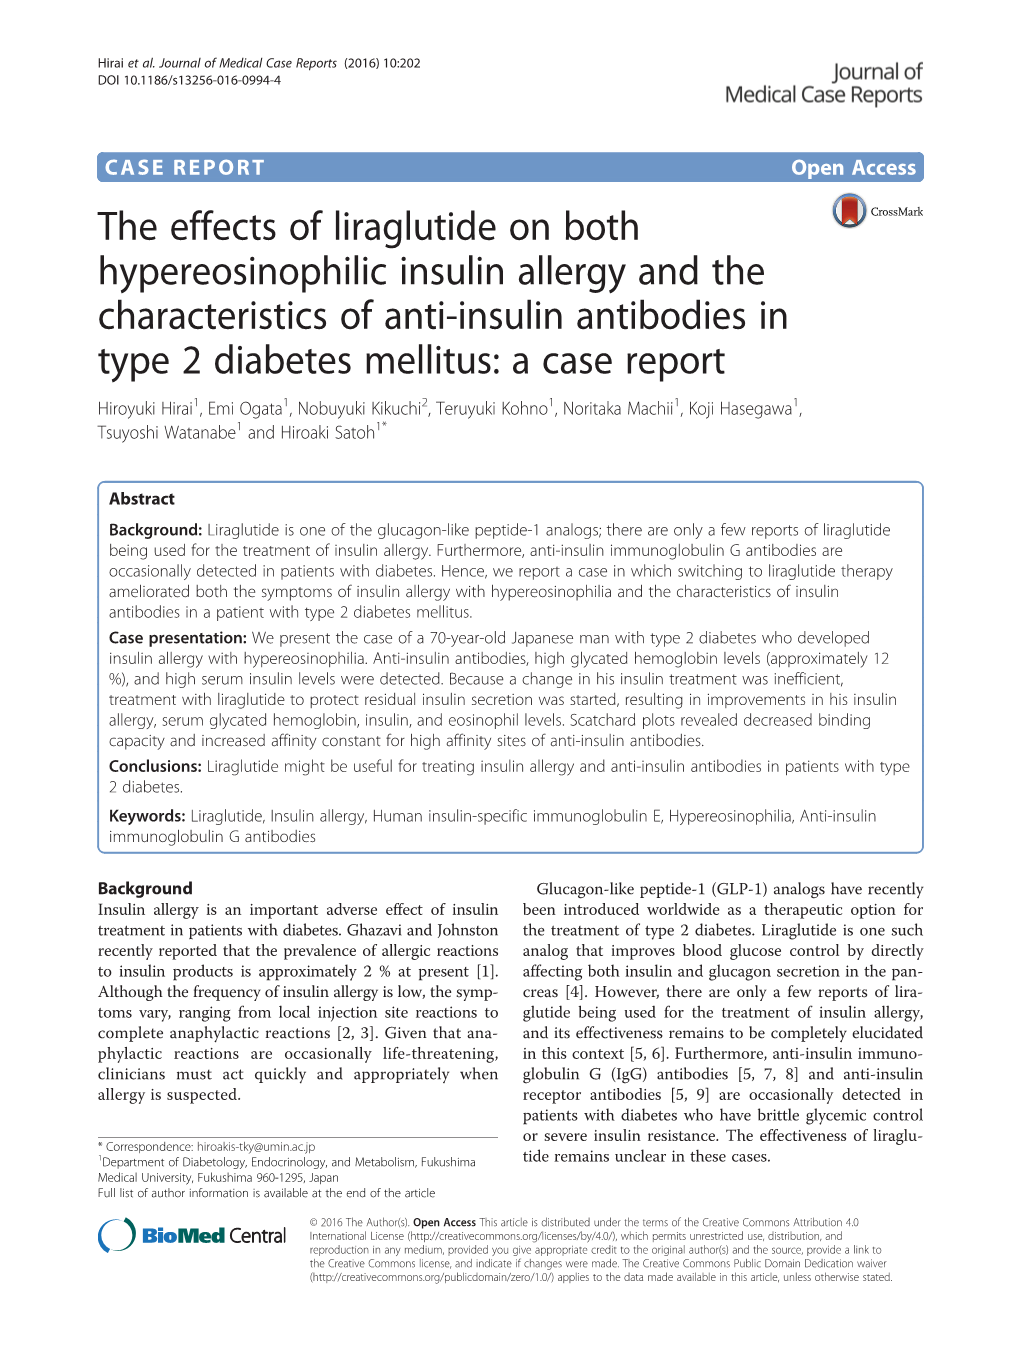 The Effects of Liraglutide on Both Hypereosinophilic Insulin Allergy